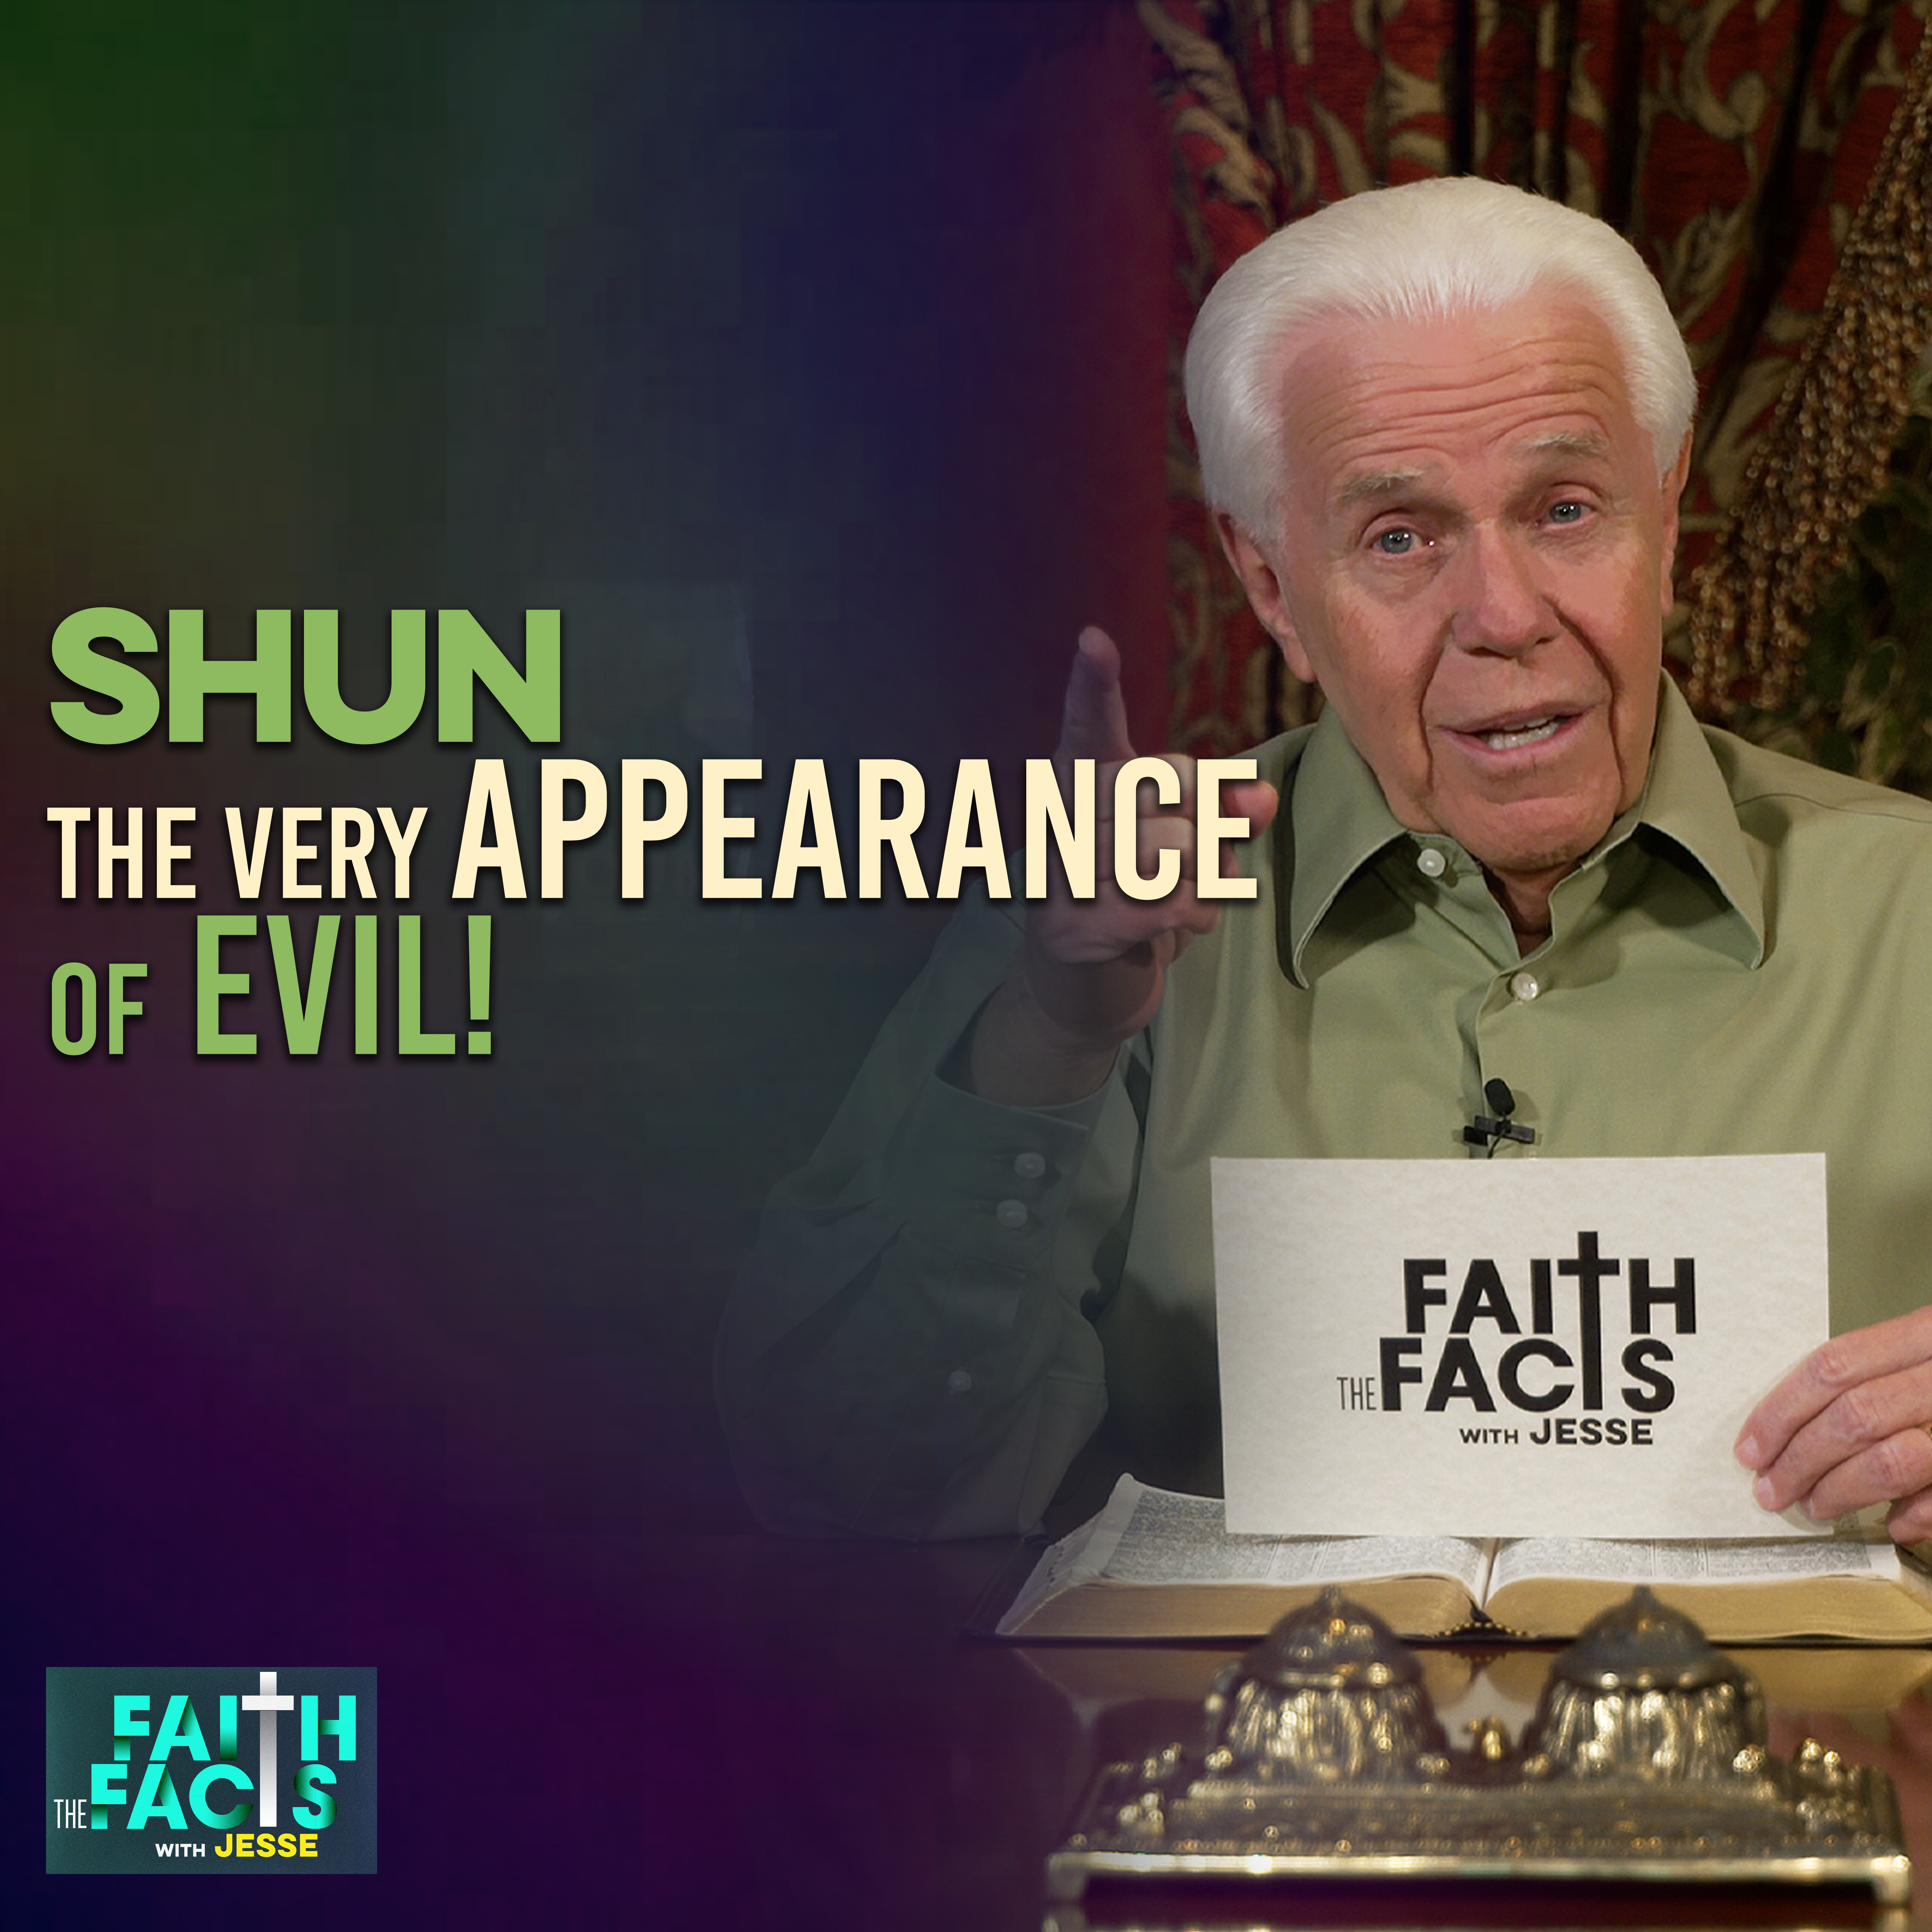 Shun The Very Appearance Of Evil!